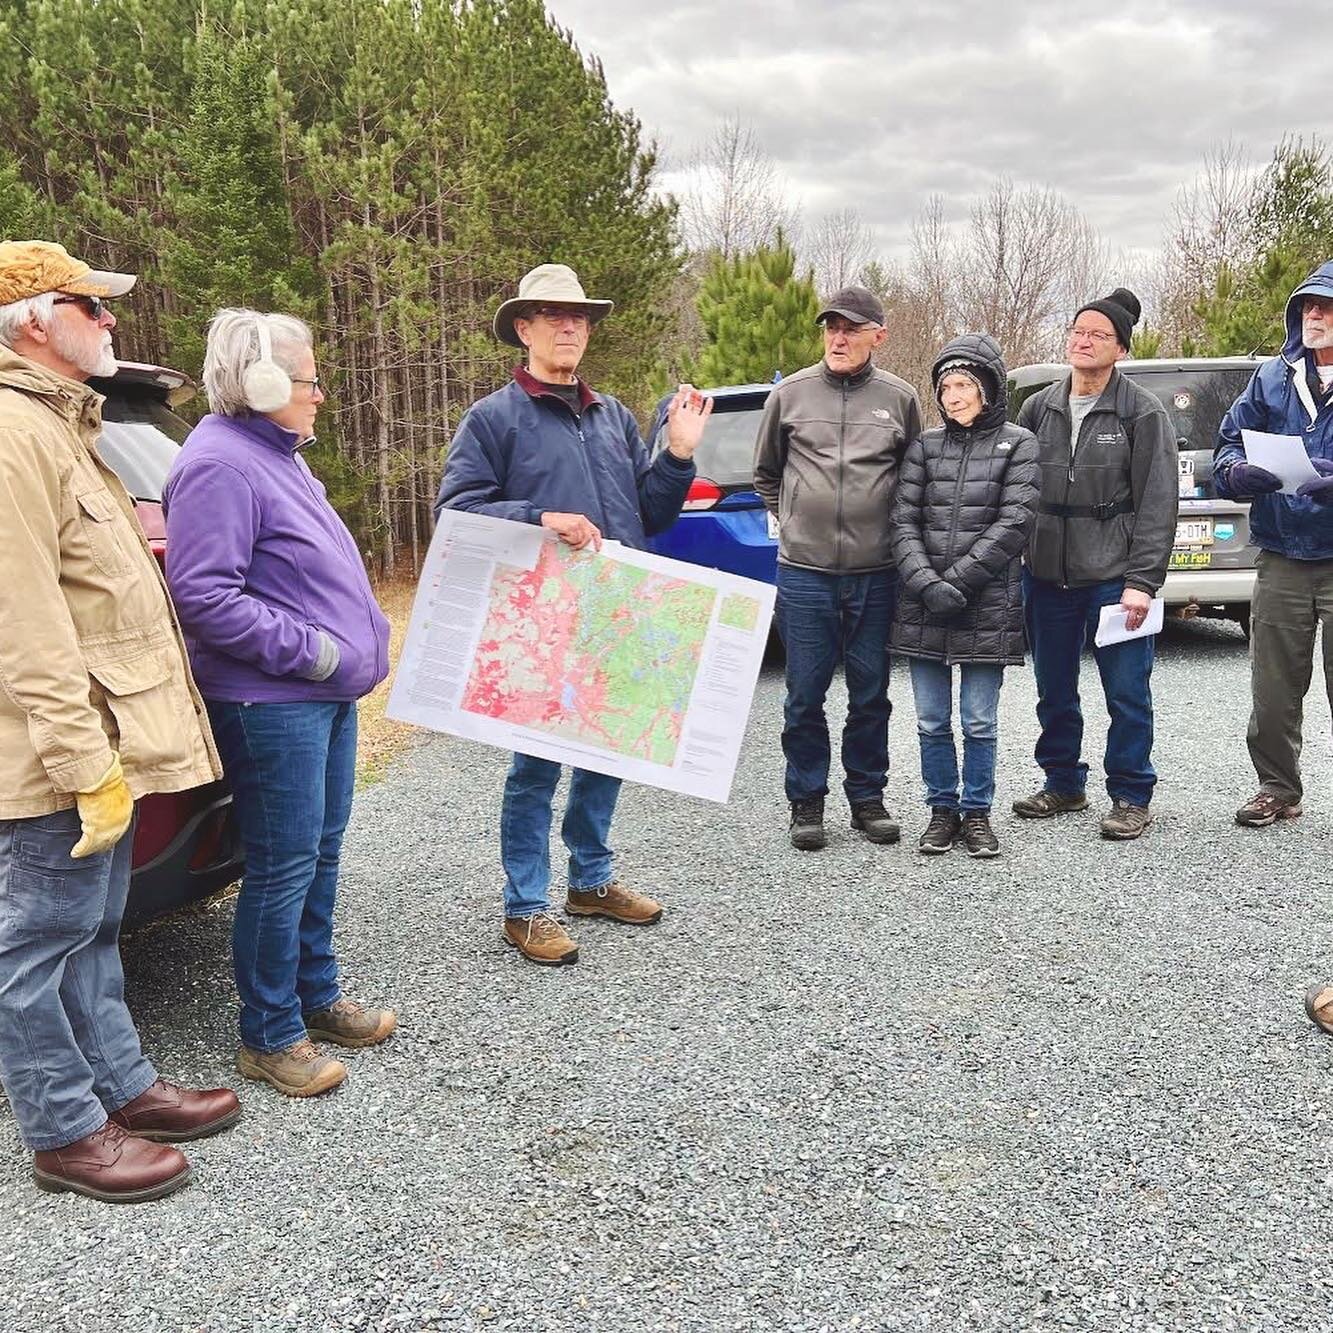 If you missed our educational event a couple weeks ago where 25 attendees learned about the natural history of our Otter Lake Esker Preserve from UWEC professor Doug Faulkner (organized by the Chippewa Valley Sierra Club), you have another chance to 